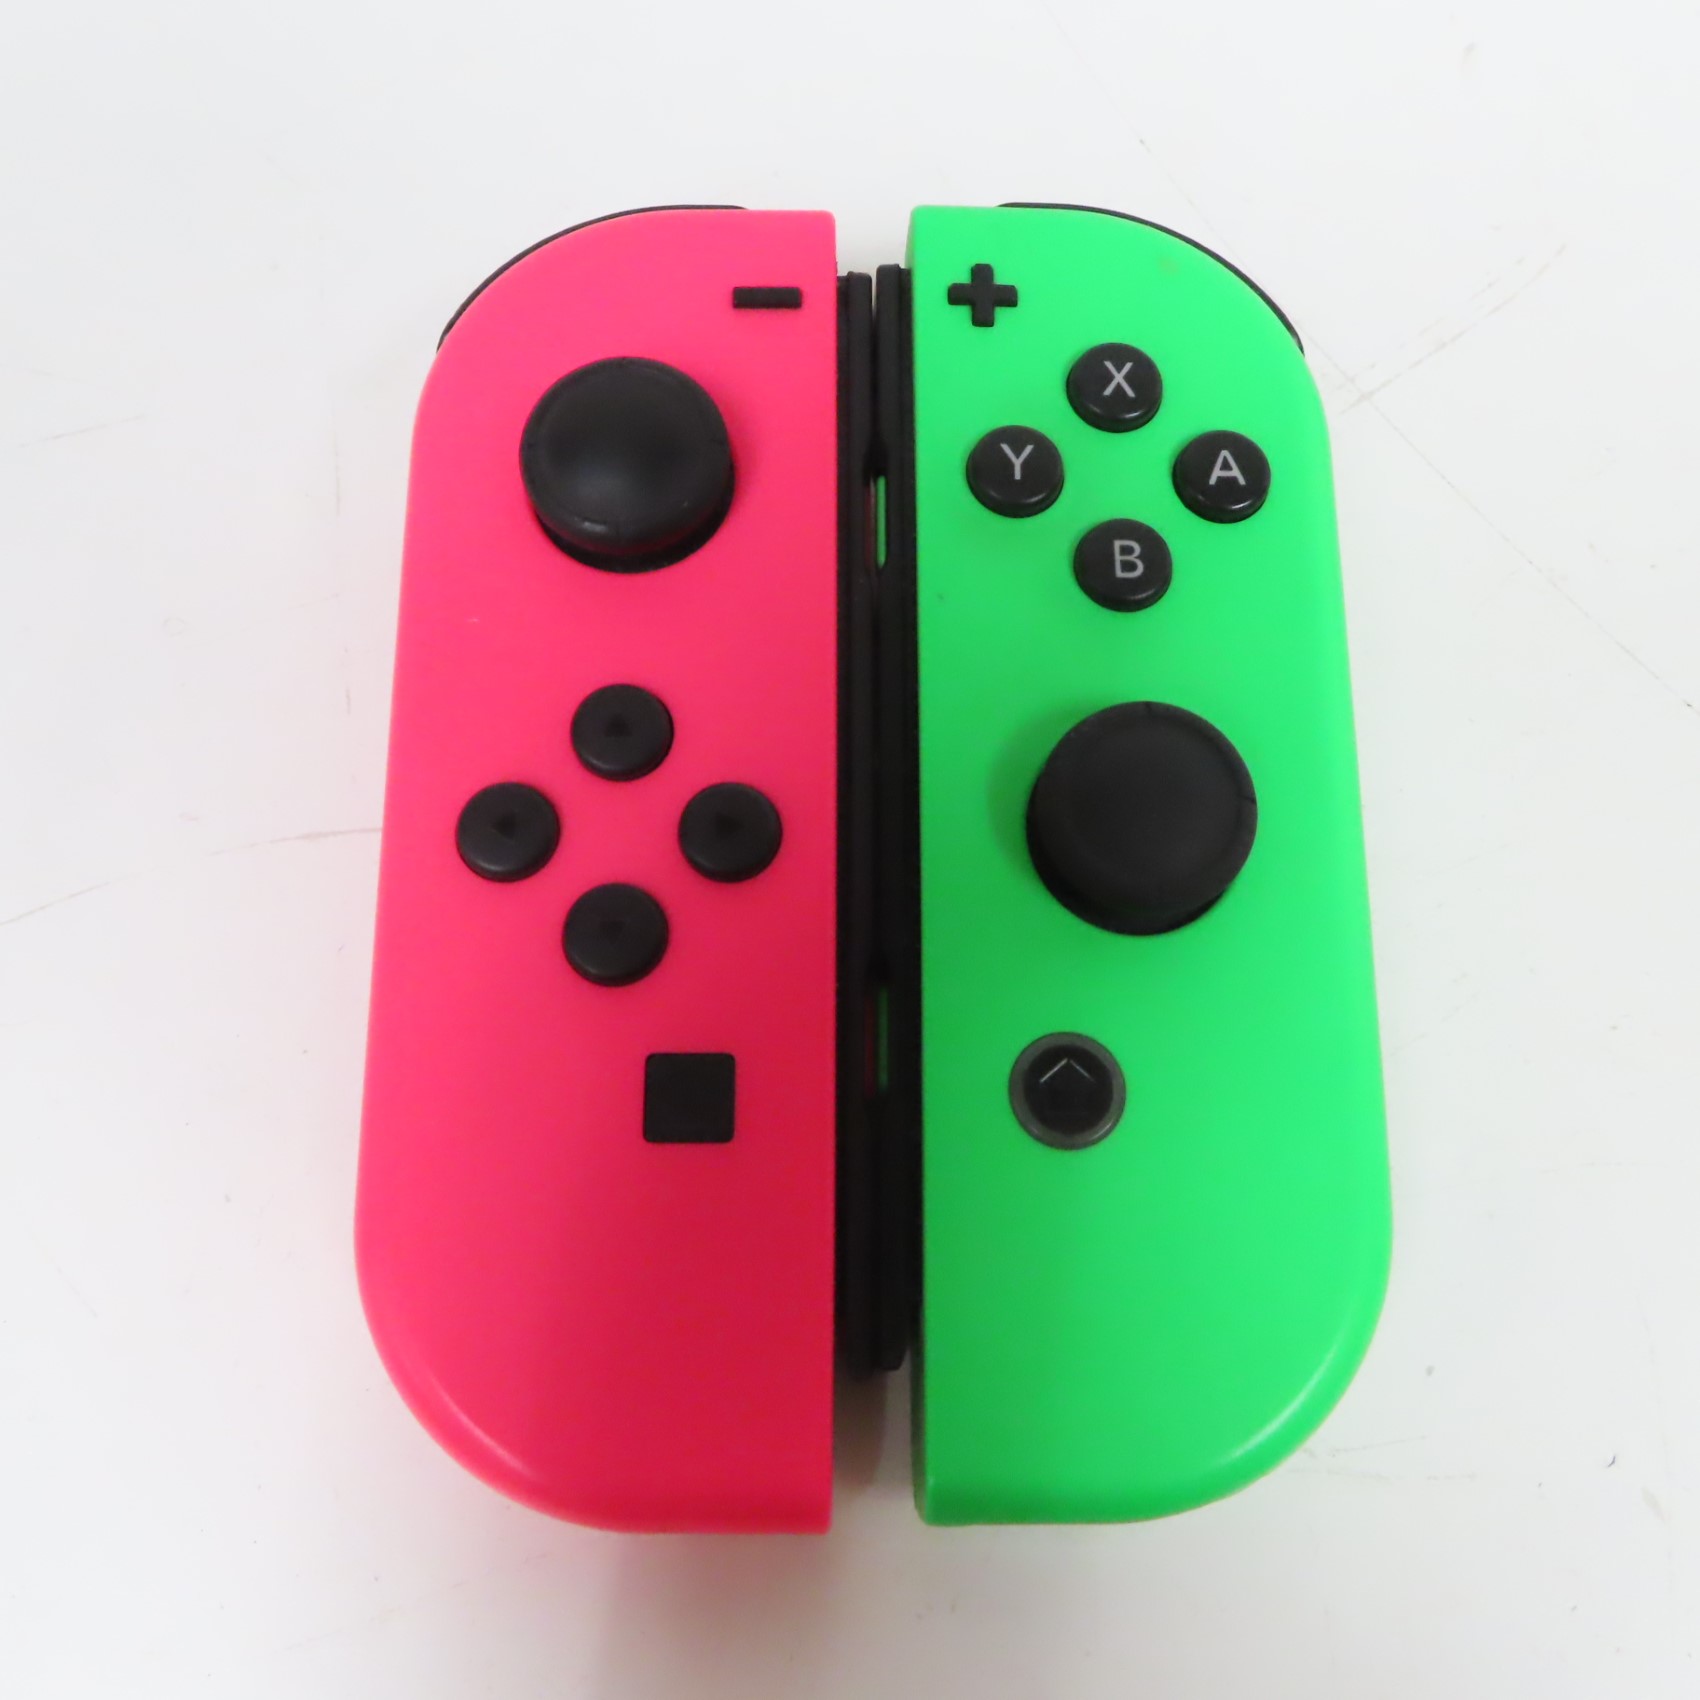 uafhængigt uklar greb Nintendo HAC-001(-01) Switch 32GB Video Game Console - Pink/Green Joycons